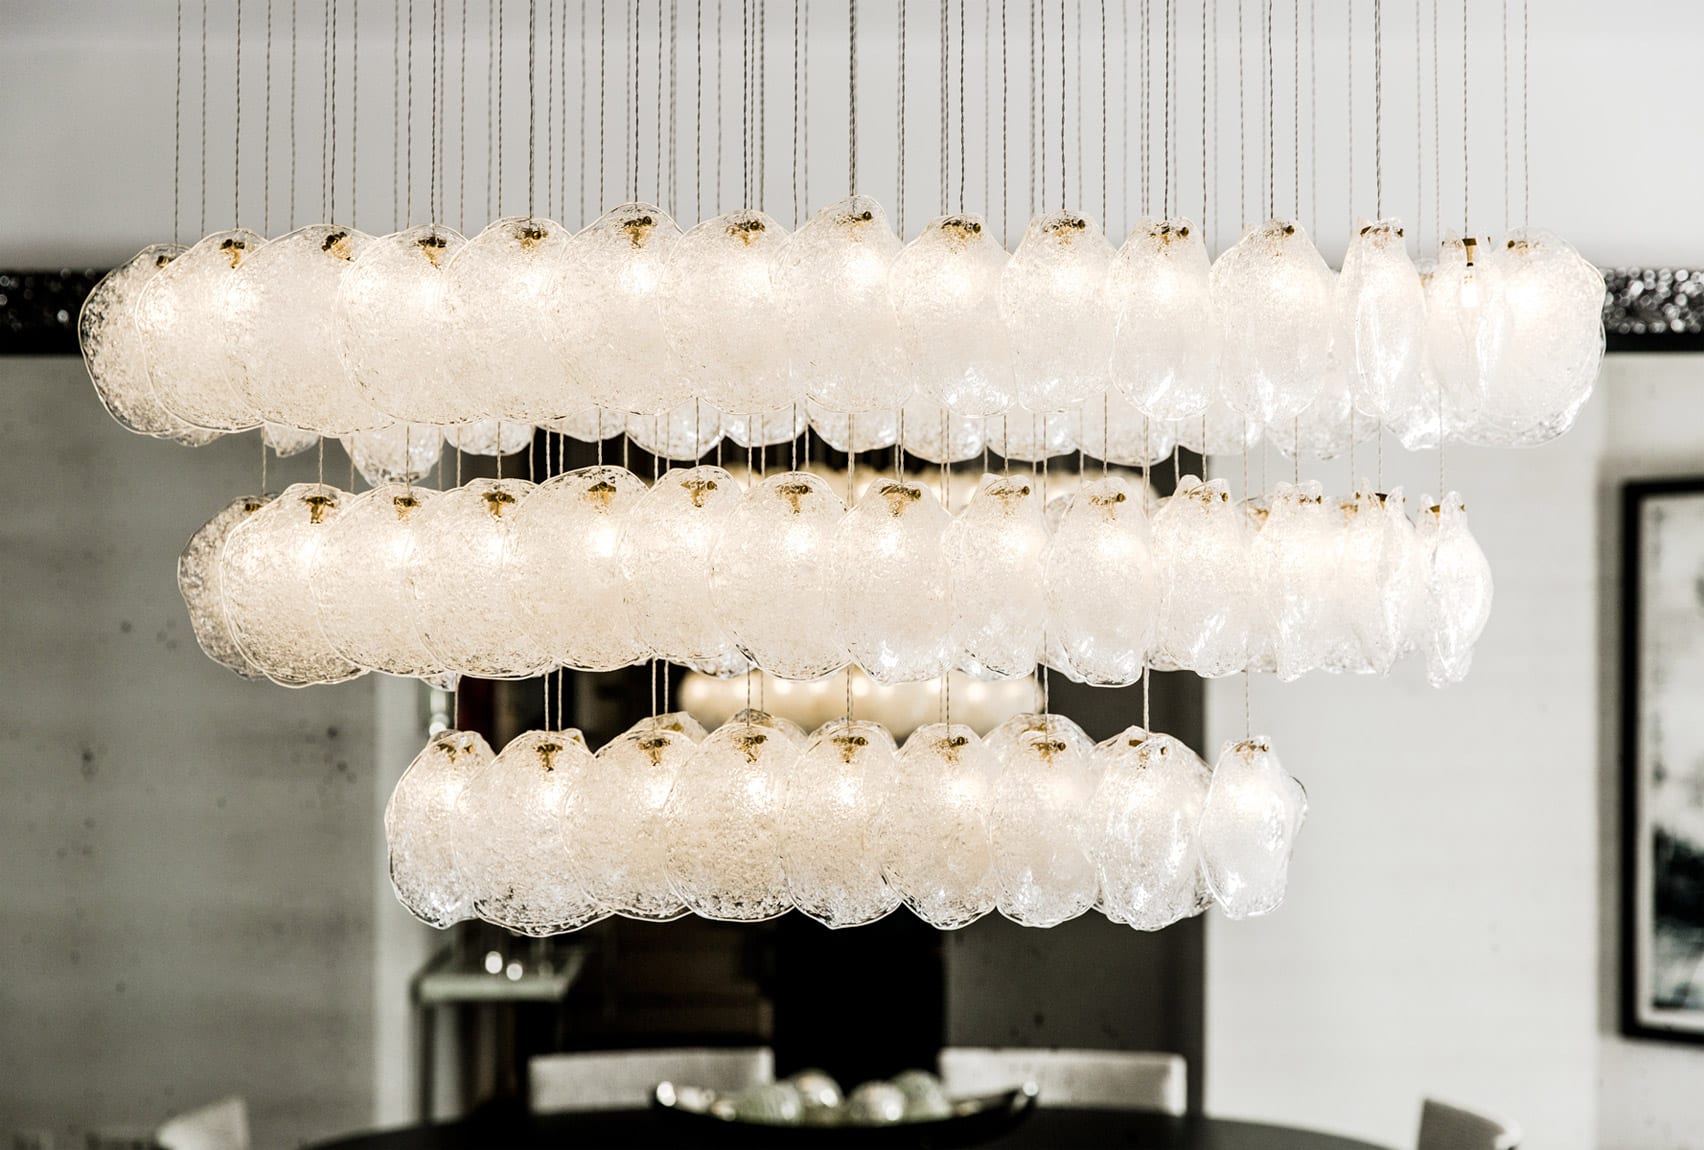 Three rows of hanging Crystal pendant lights